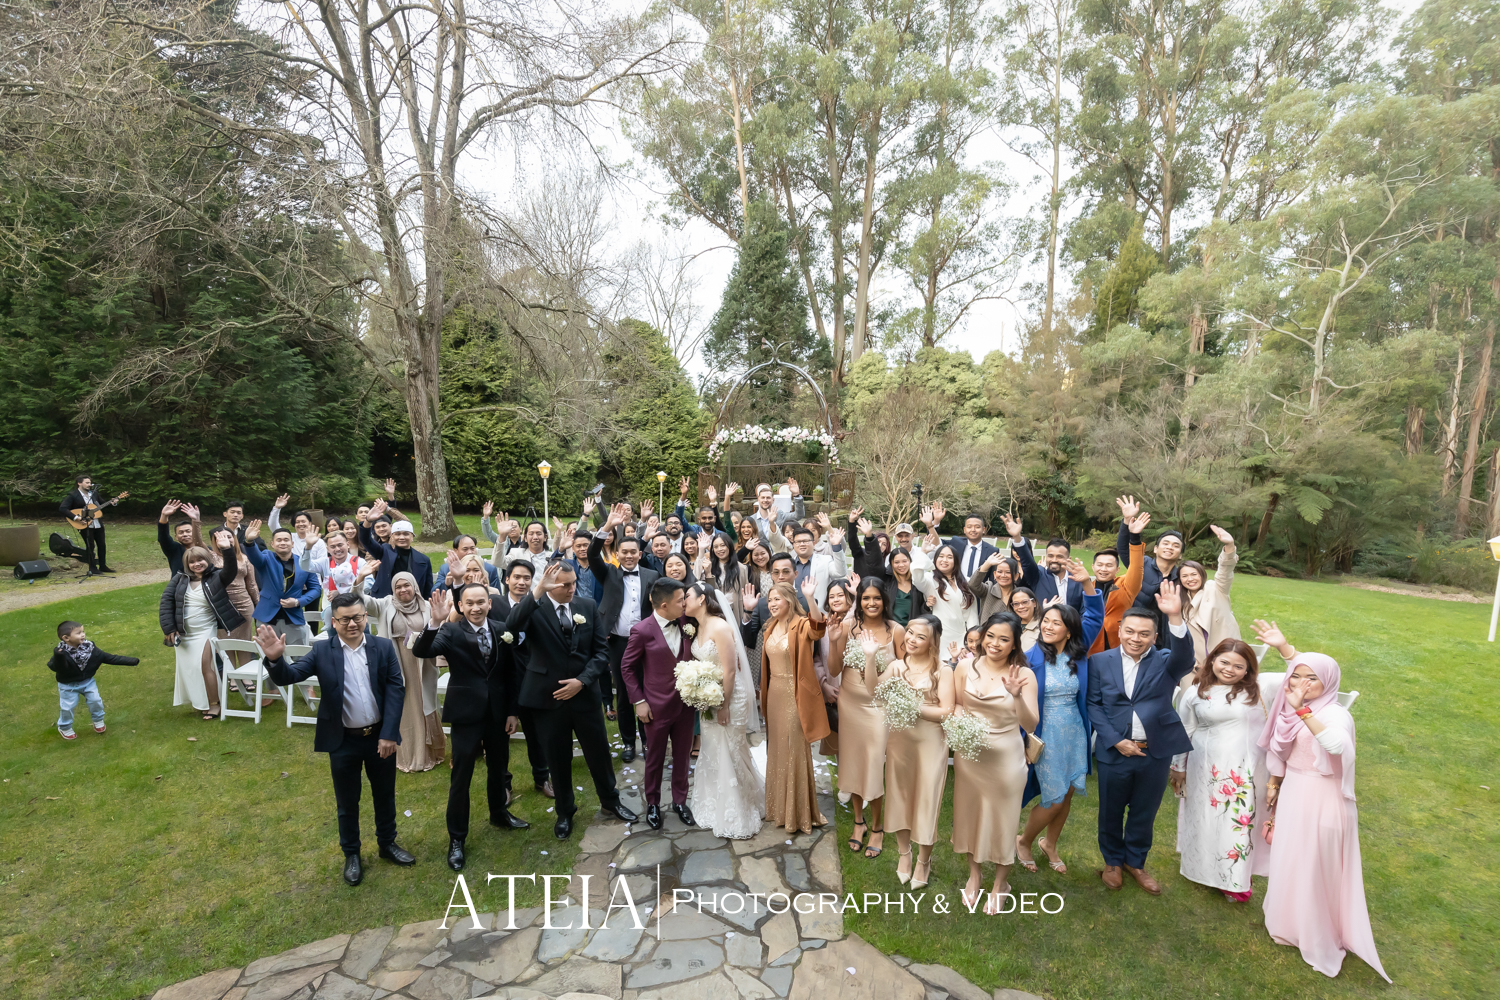 , Claire and Mclaurin&#8217;s wedding photography at Tatra Receptions captured by ATEIA Photography &#038; Video